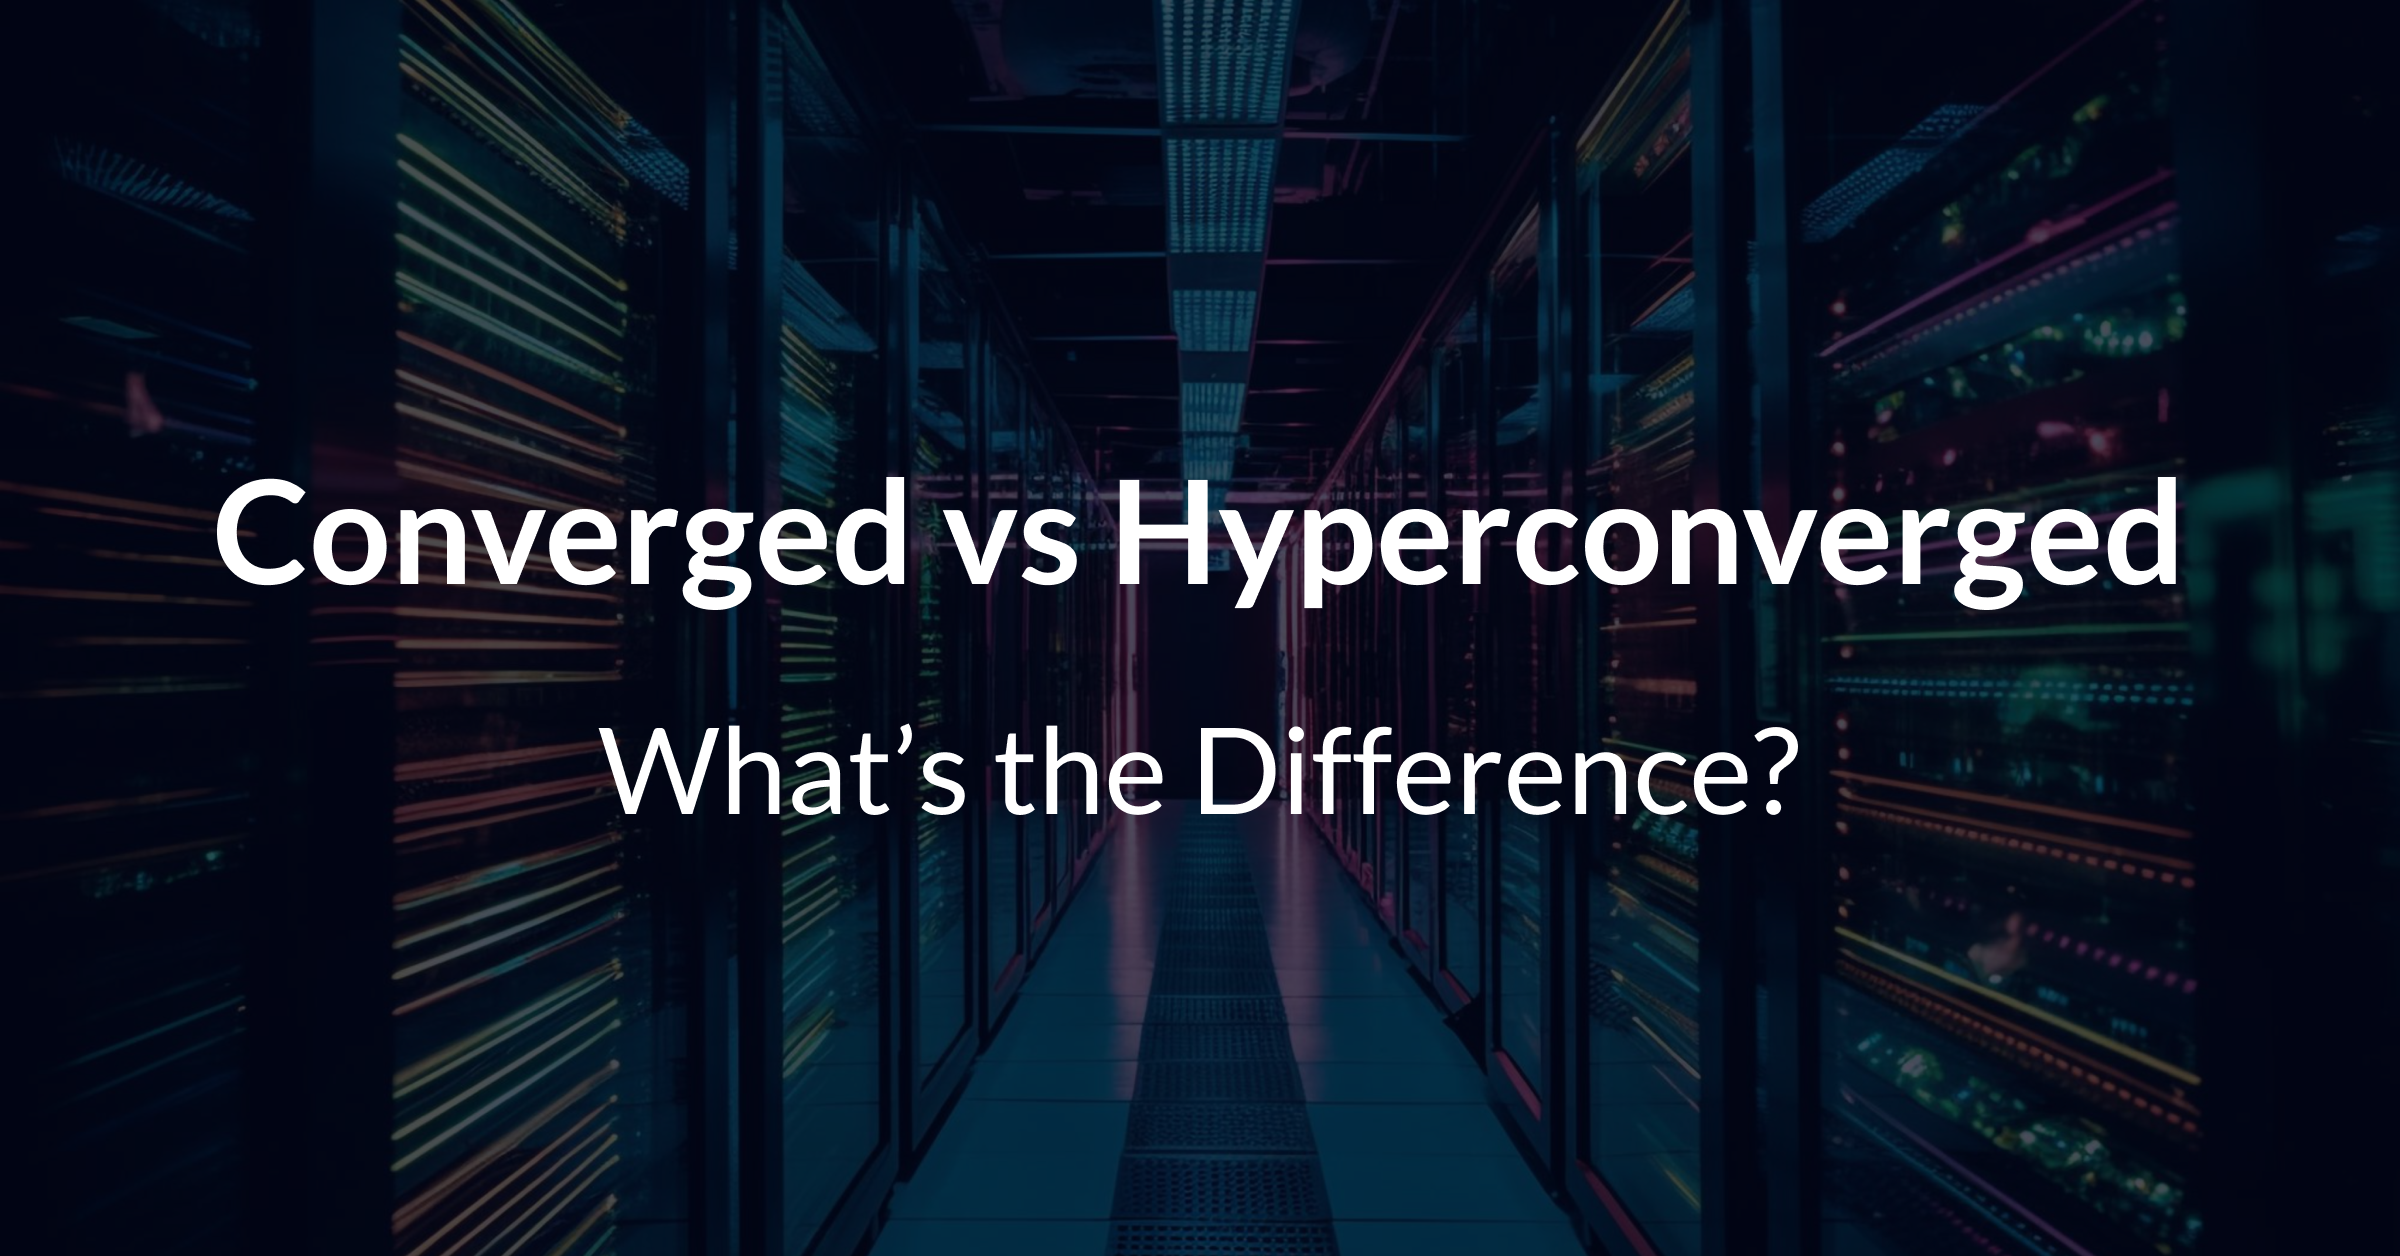 Converged vs Hyperconverged Infrastructure